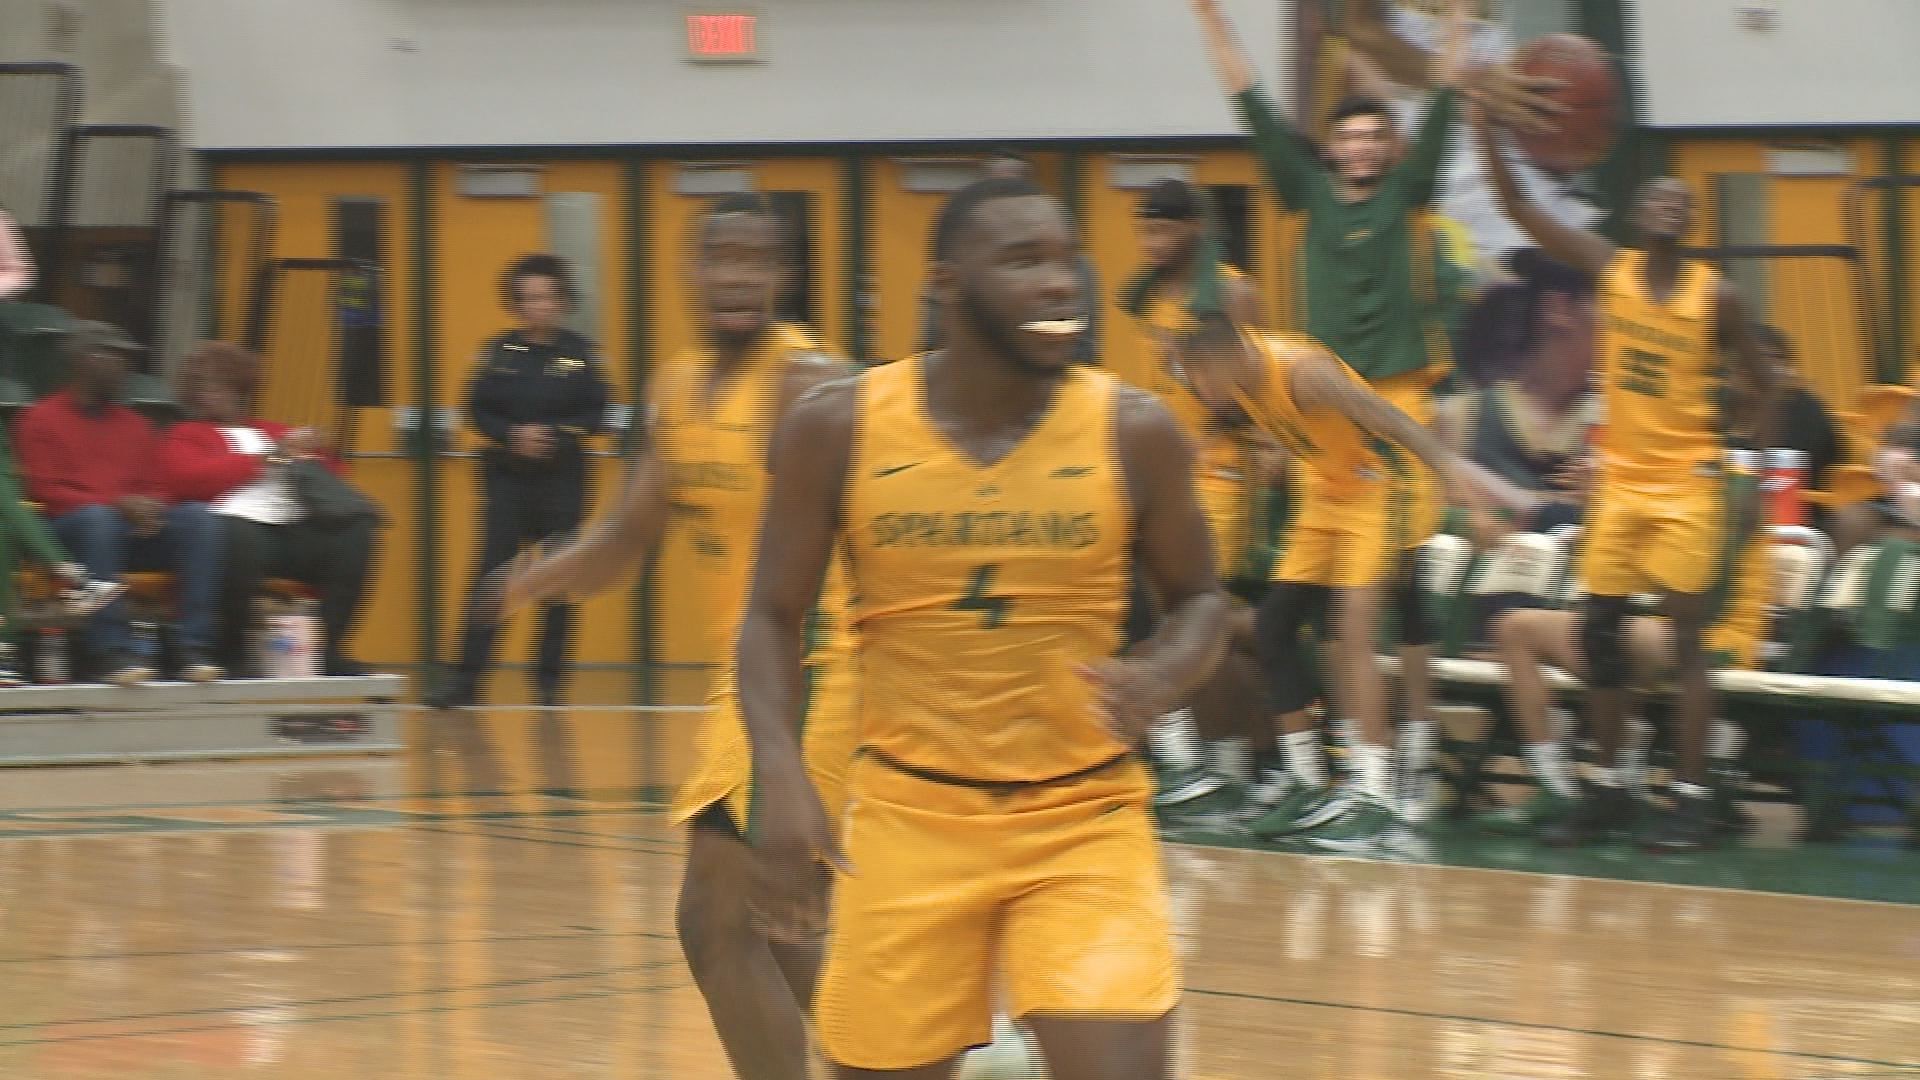 Joe Bryant, Jr. led three players in double figures as NSU won over Bethune Cookman 85-72 in their conference opener.